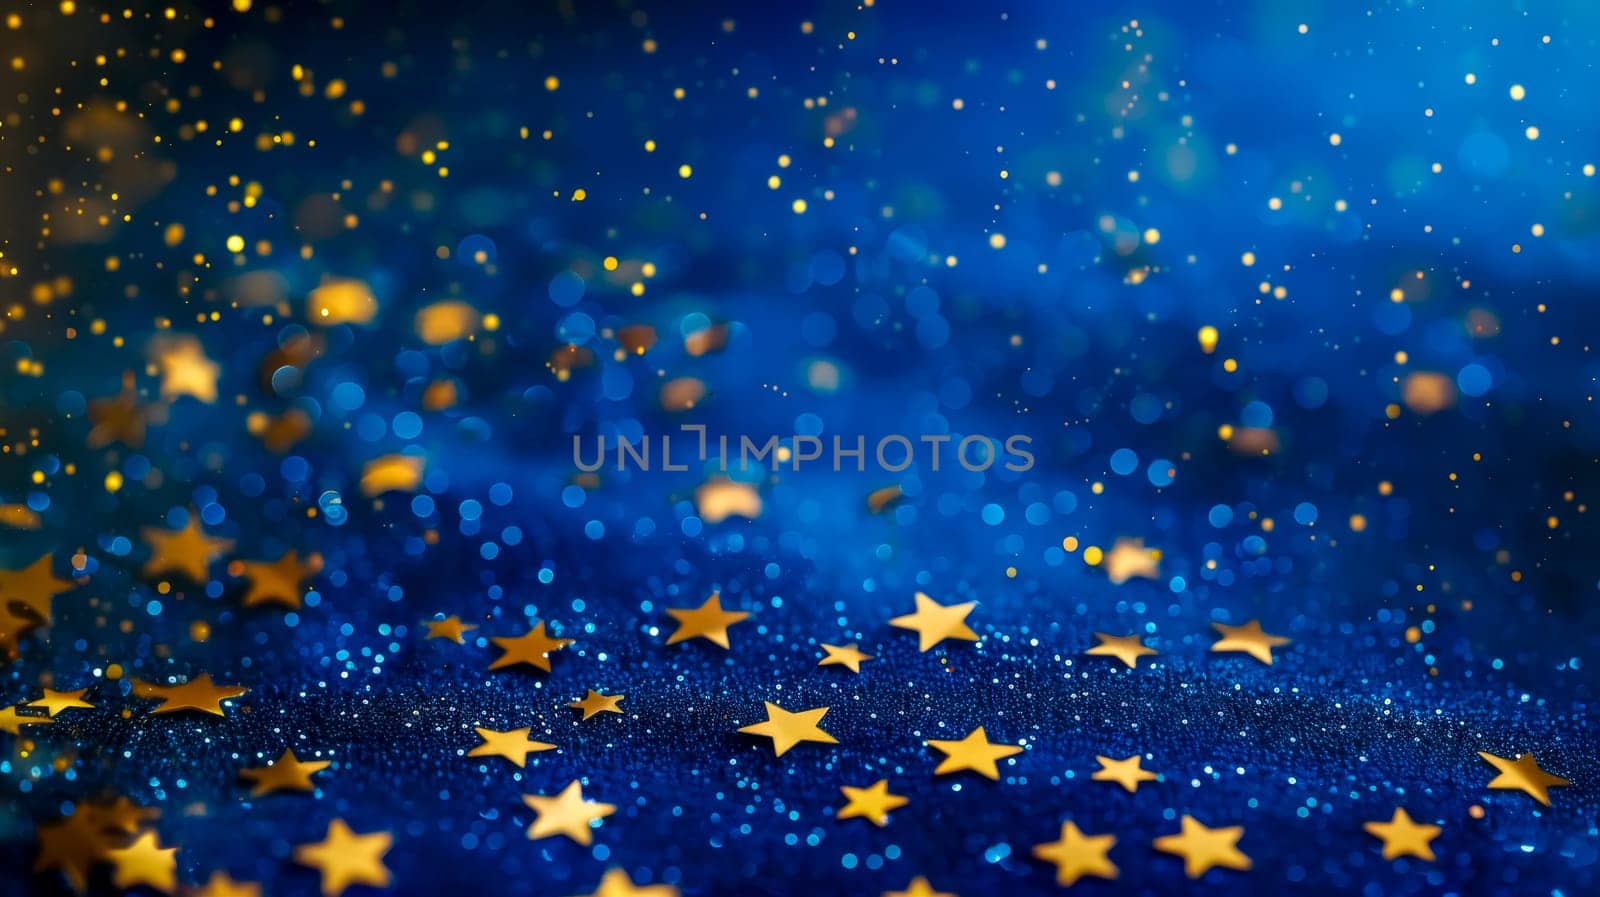 Abstract blue background with sparkling tiny golden stars creating a festive atmosphere